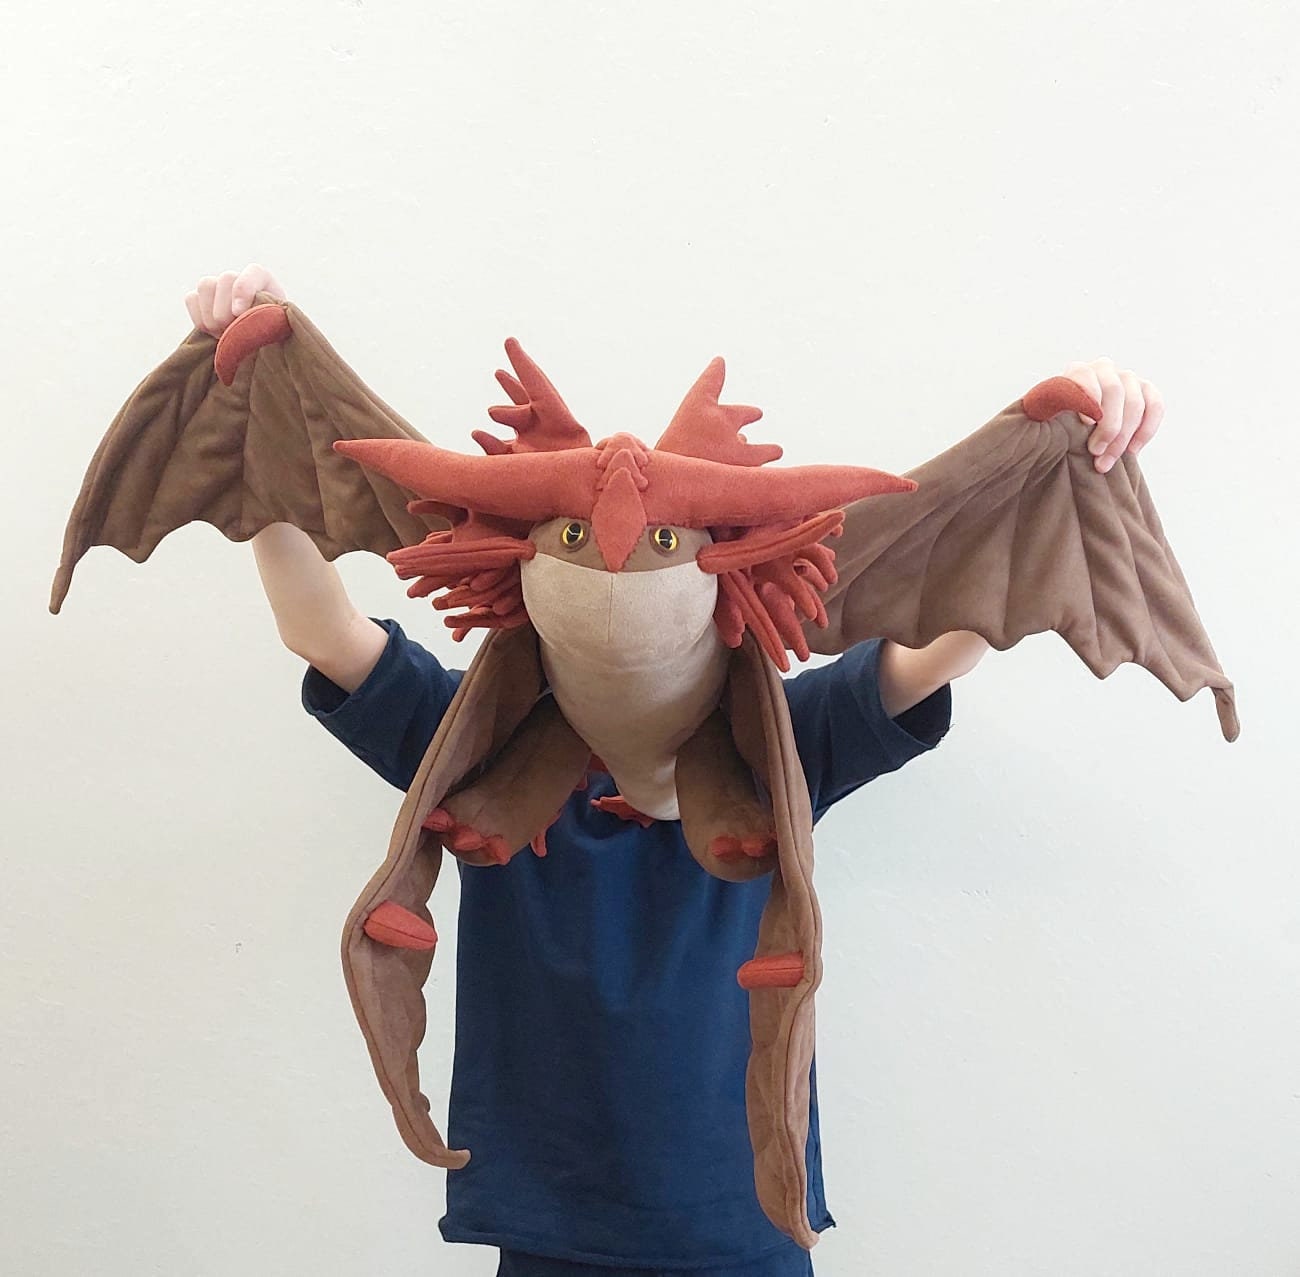 OFFICIAL 12 INCH DRAGONS THE NINE REALMS SOFT PLUSH TOY HOW TO TRAIN YOUR  DRAGON